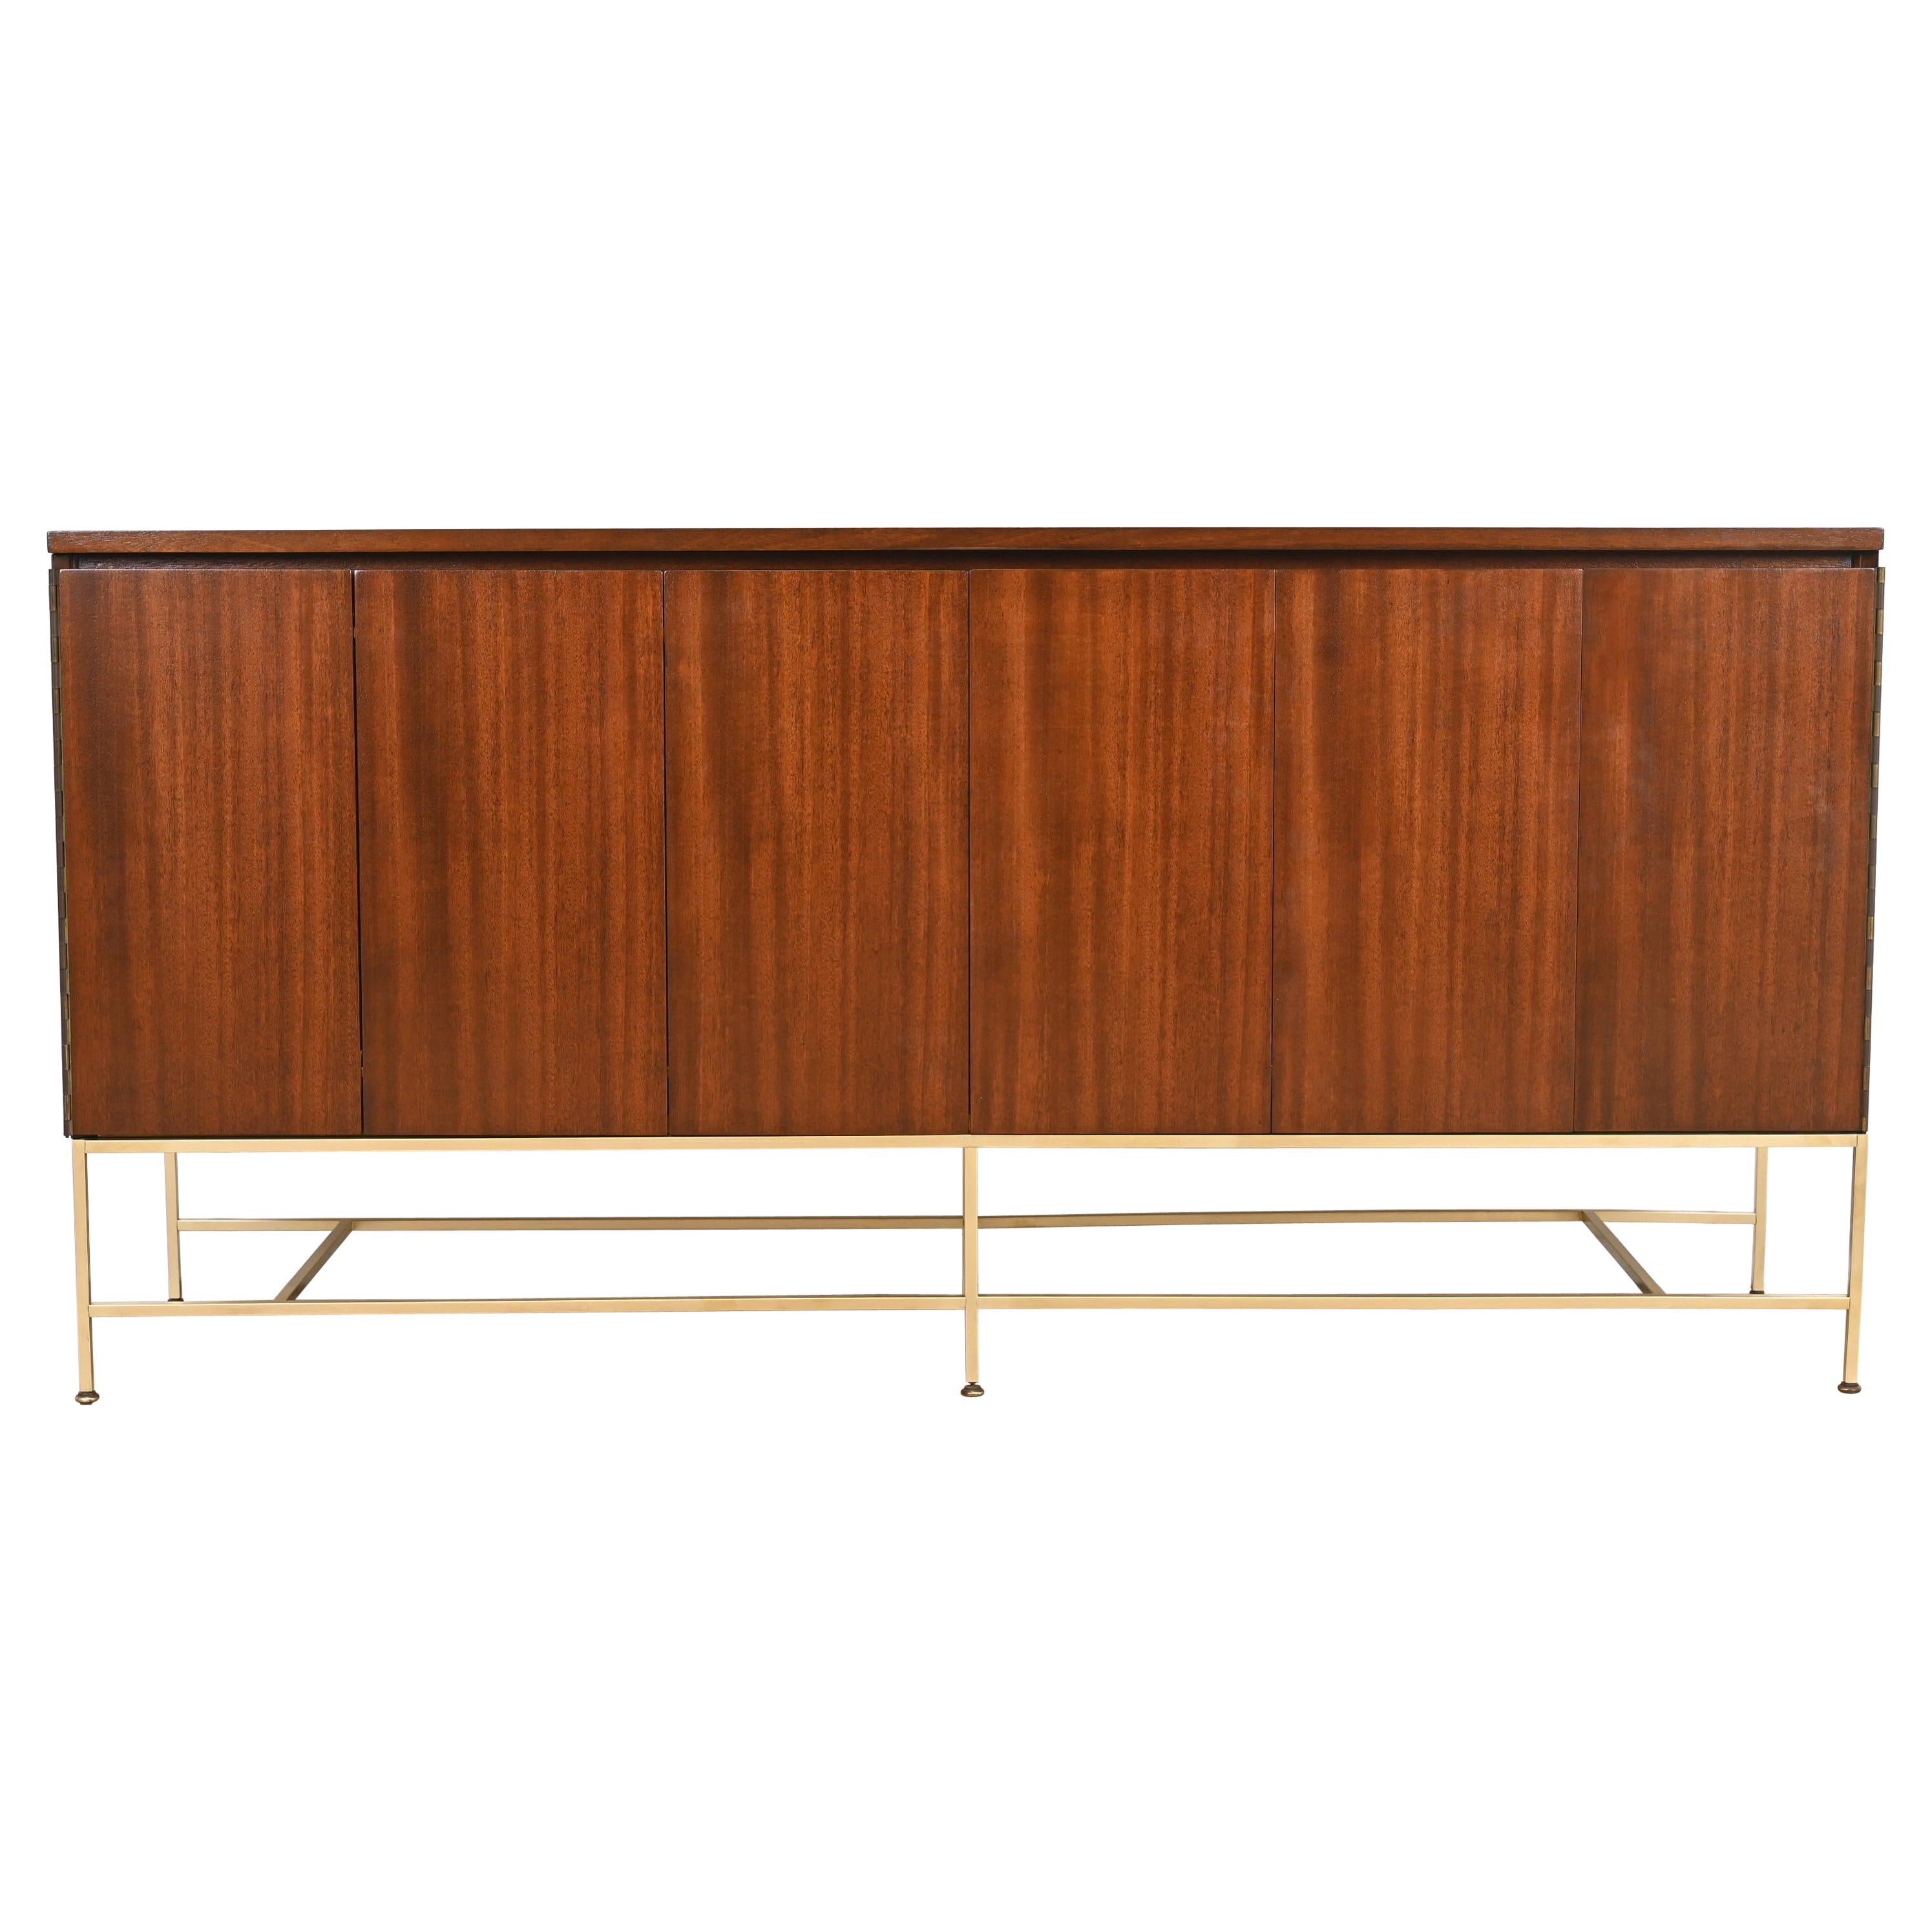 Paul McCobb Irwin Collection Mahogany and Brass Dresser or Credenza, Refinished